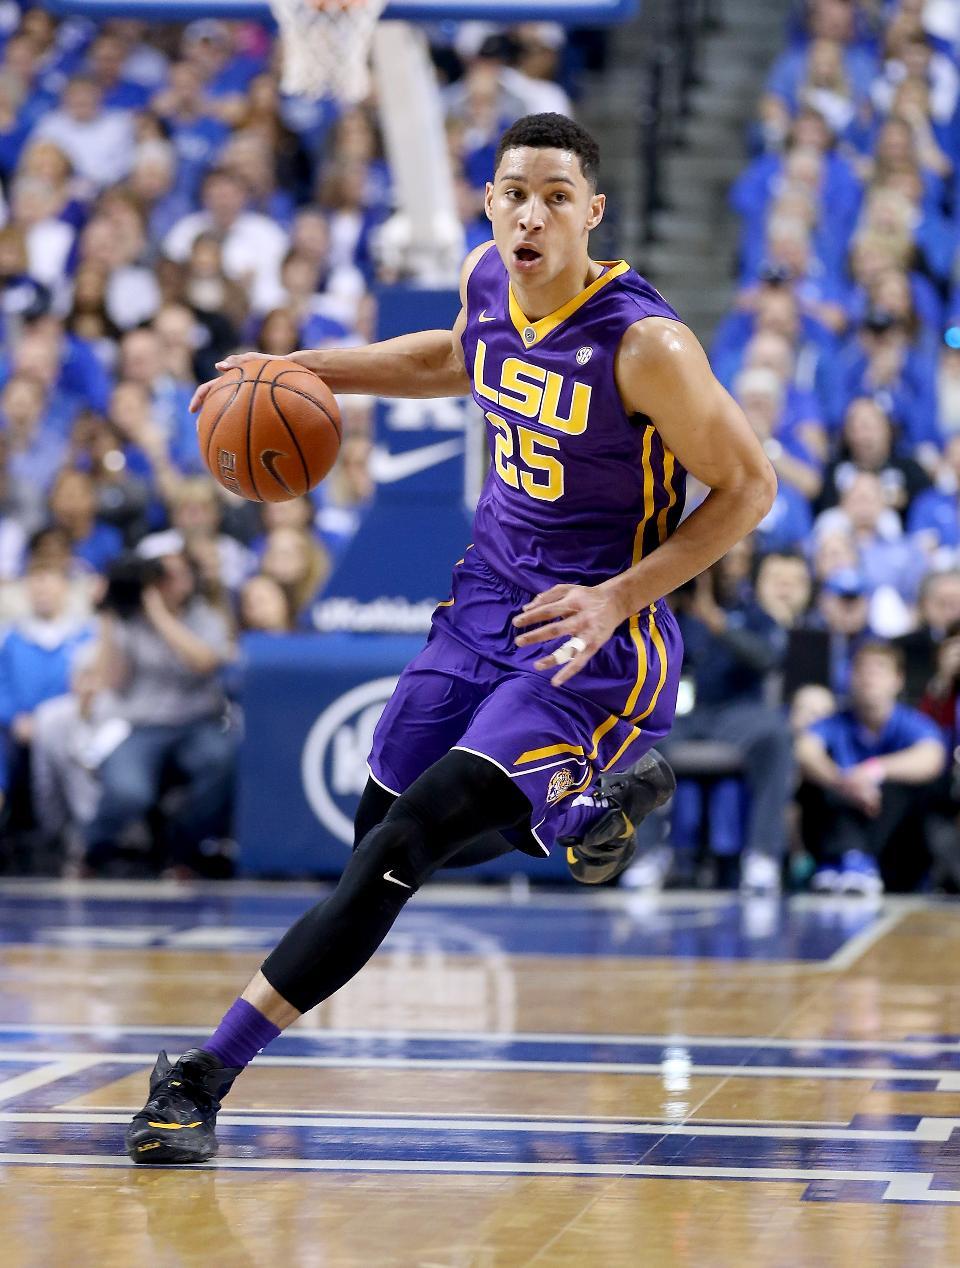 The Grade Shaming Of Ben Simmons: Part Of The NCAA's College